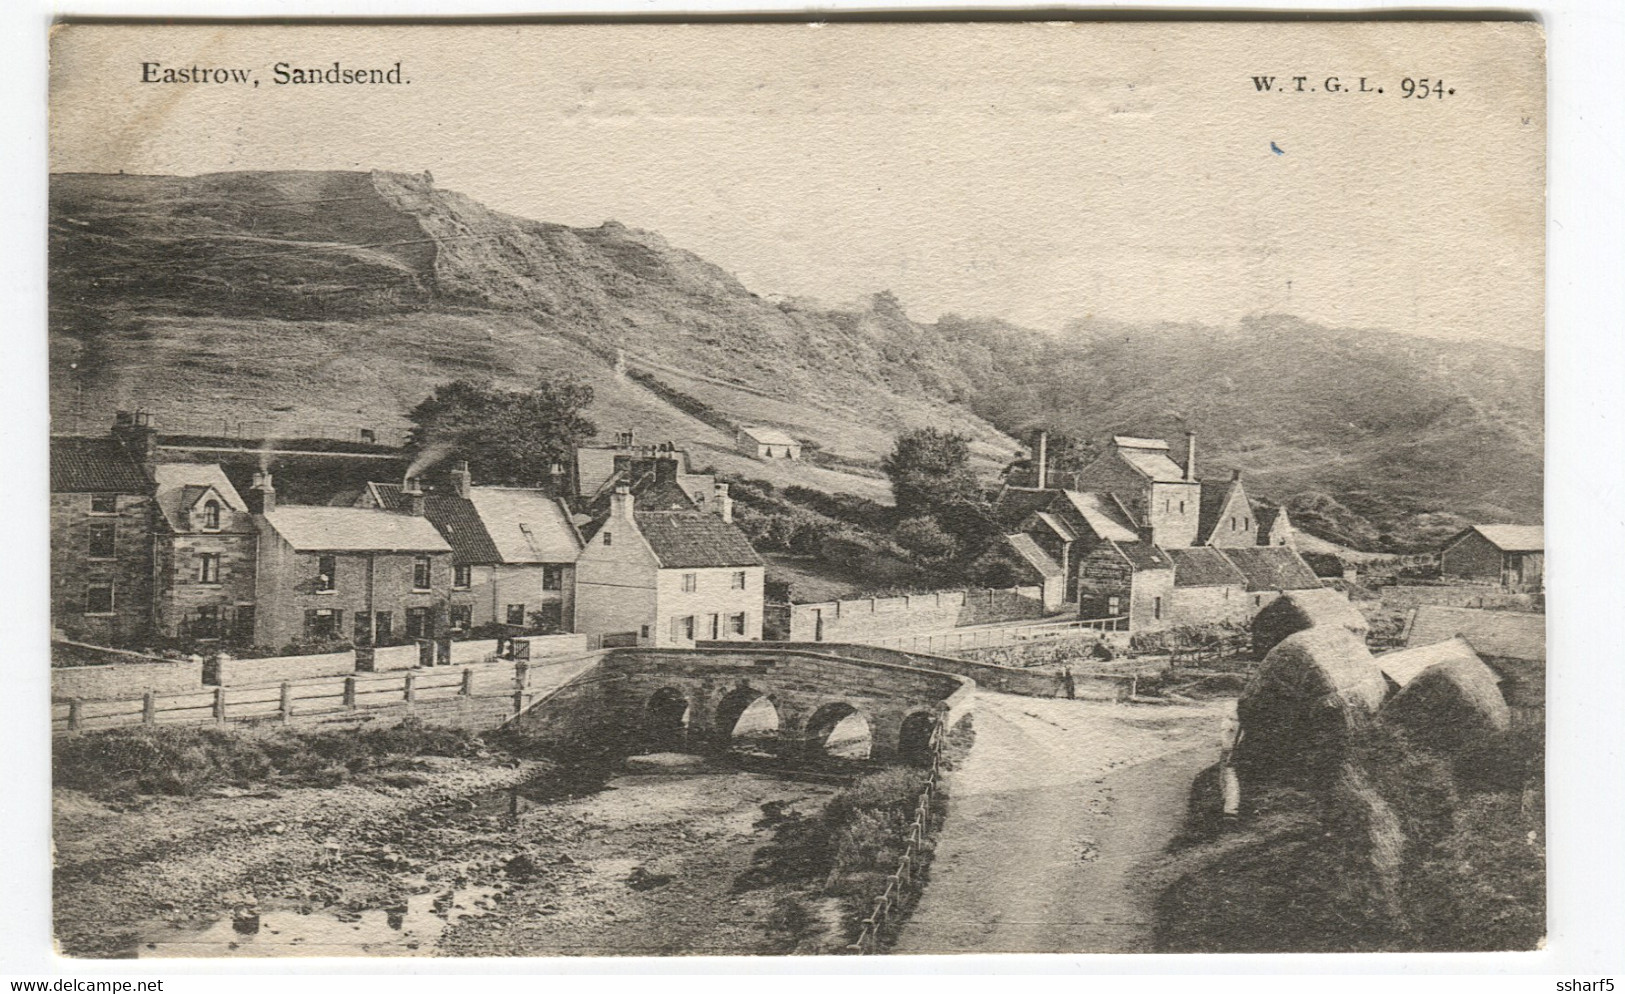 EASTROW SANDSEND Lazy Town View W.T.G.L. 954 Sent 1911 - Whitby